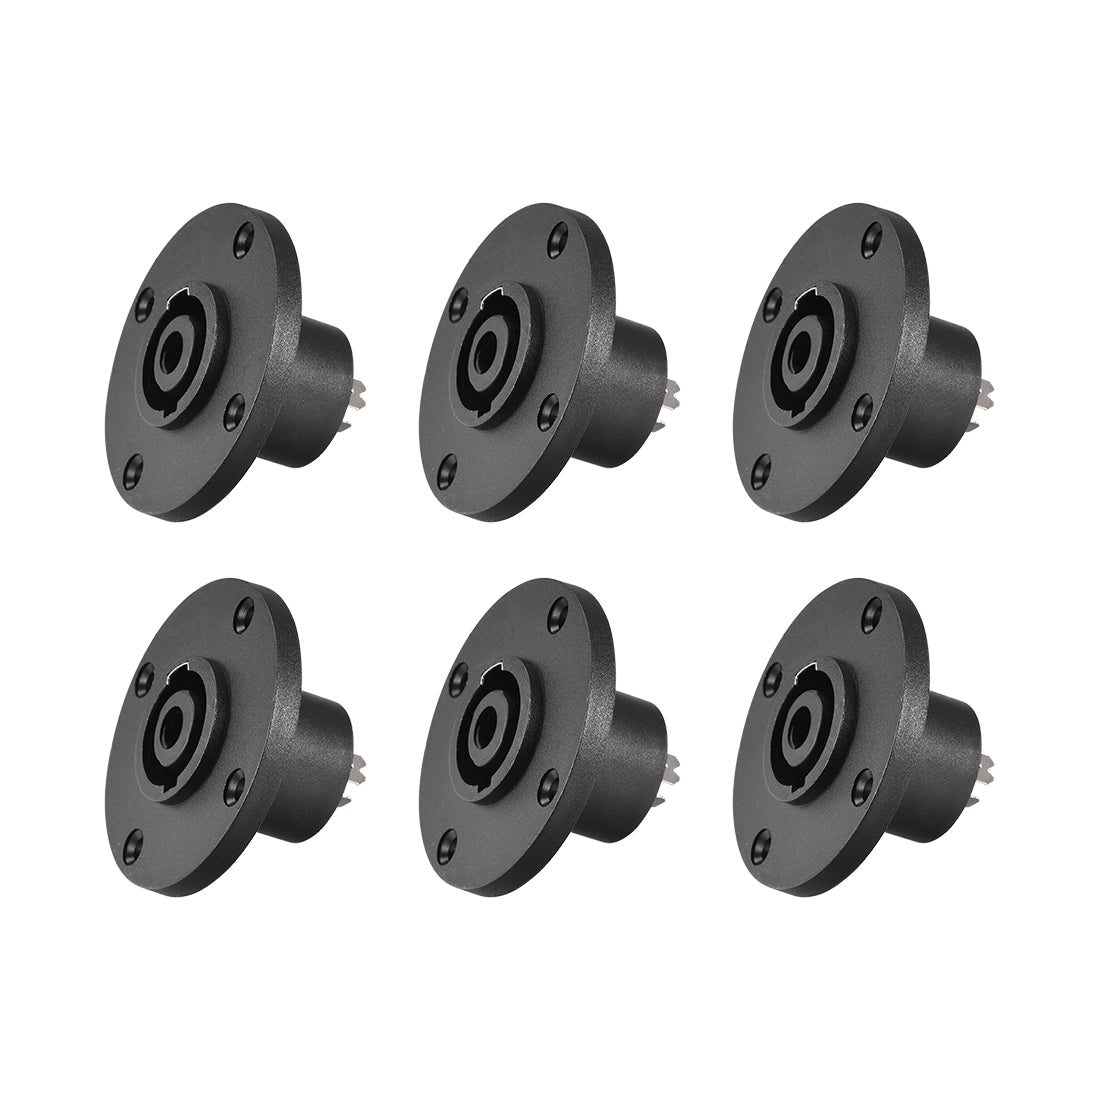 uxcell Uxcell 4-Pole Panel Mount Connector Speaker Jack Twist Lock, Round Speaker Jack Plate with Metal Insert,6Pcs